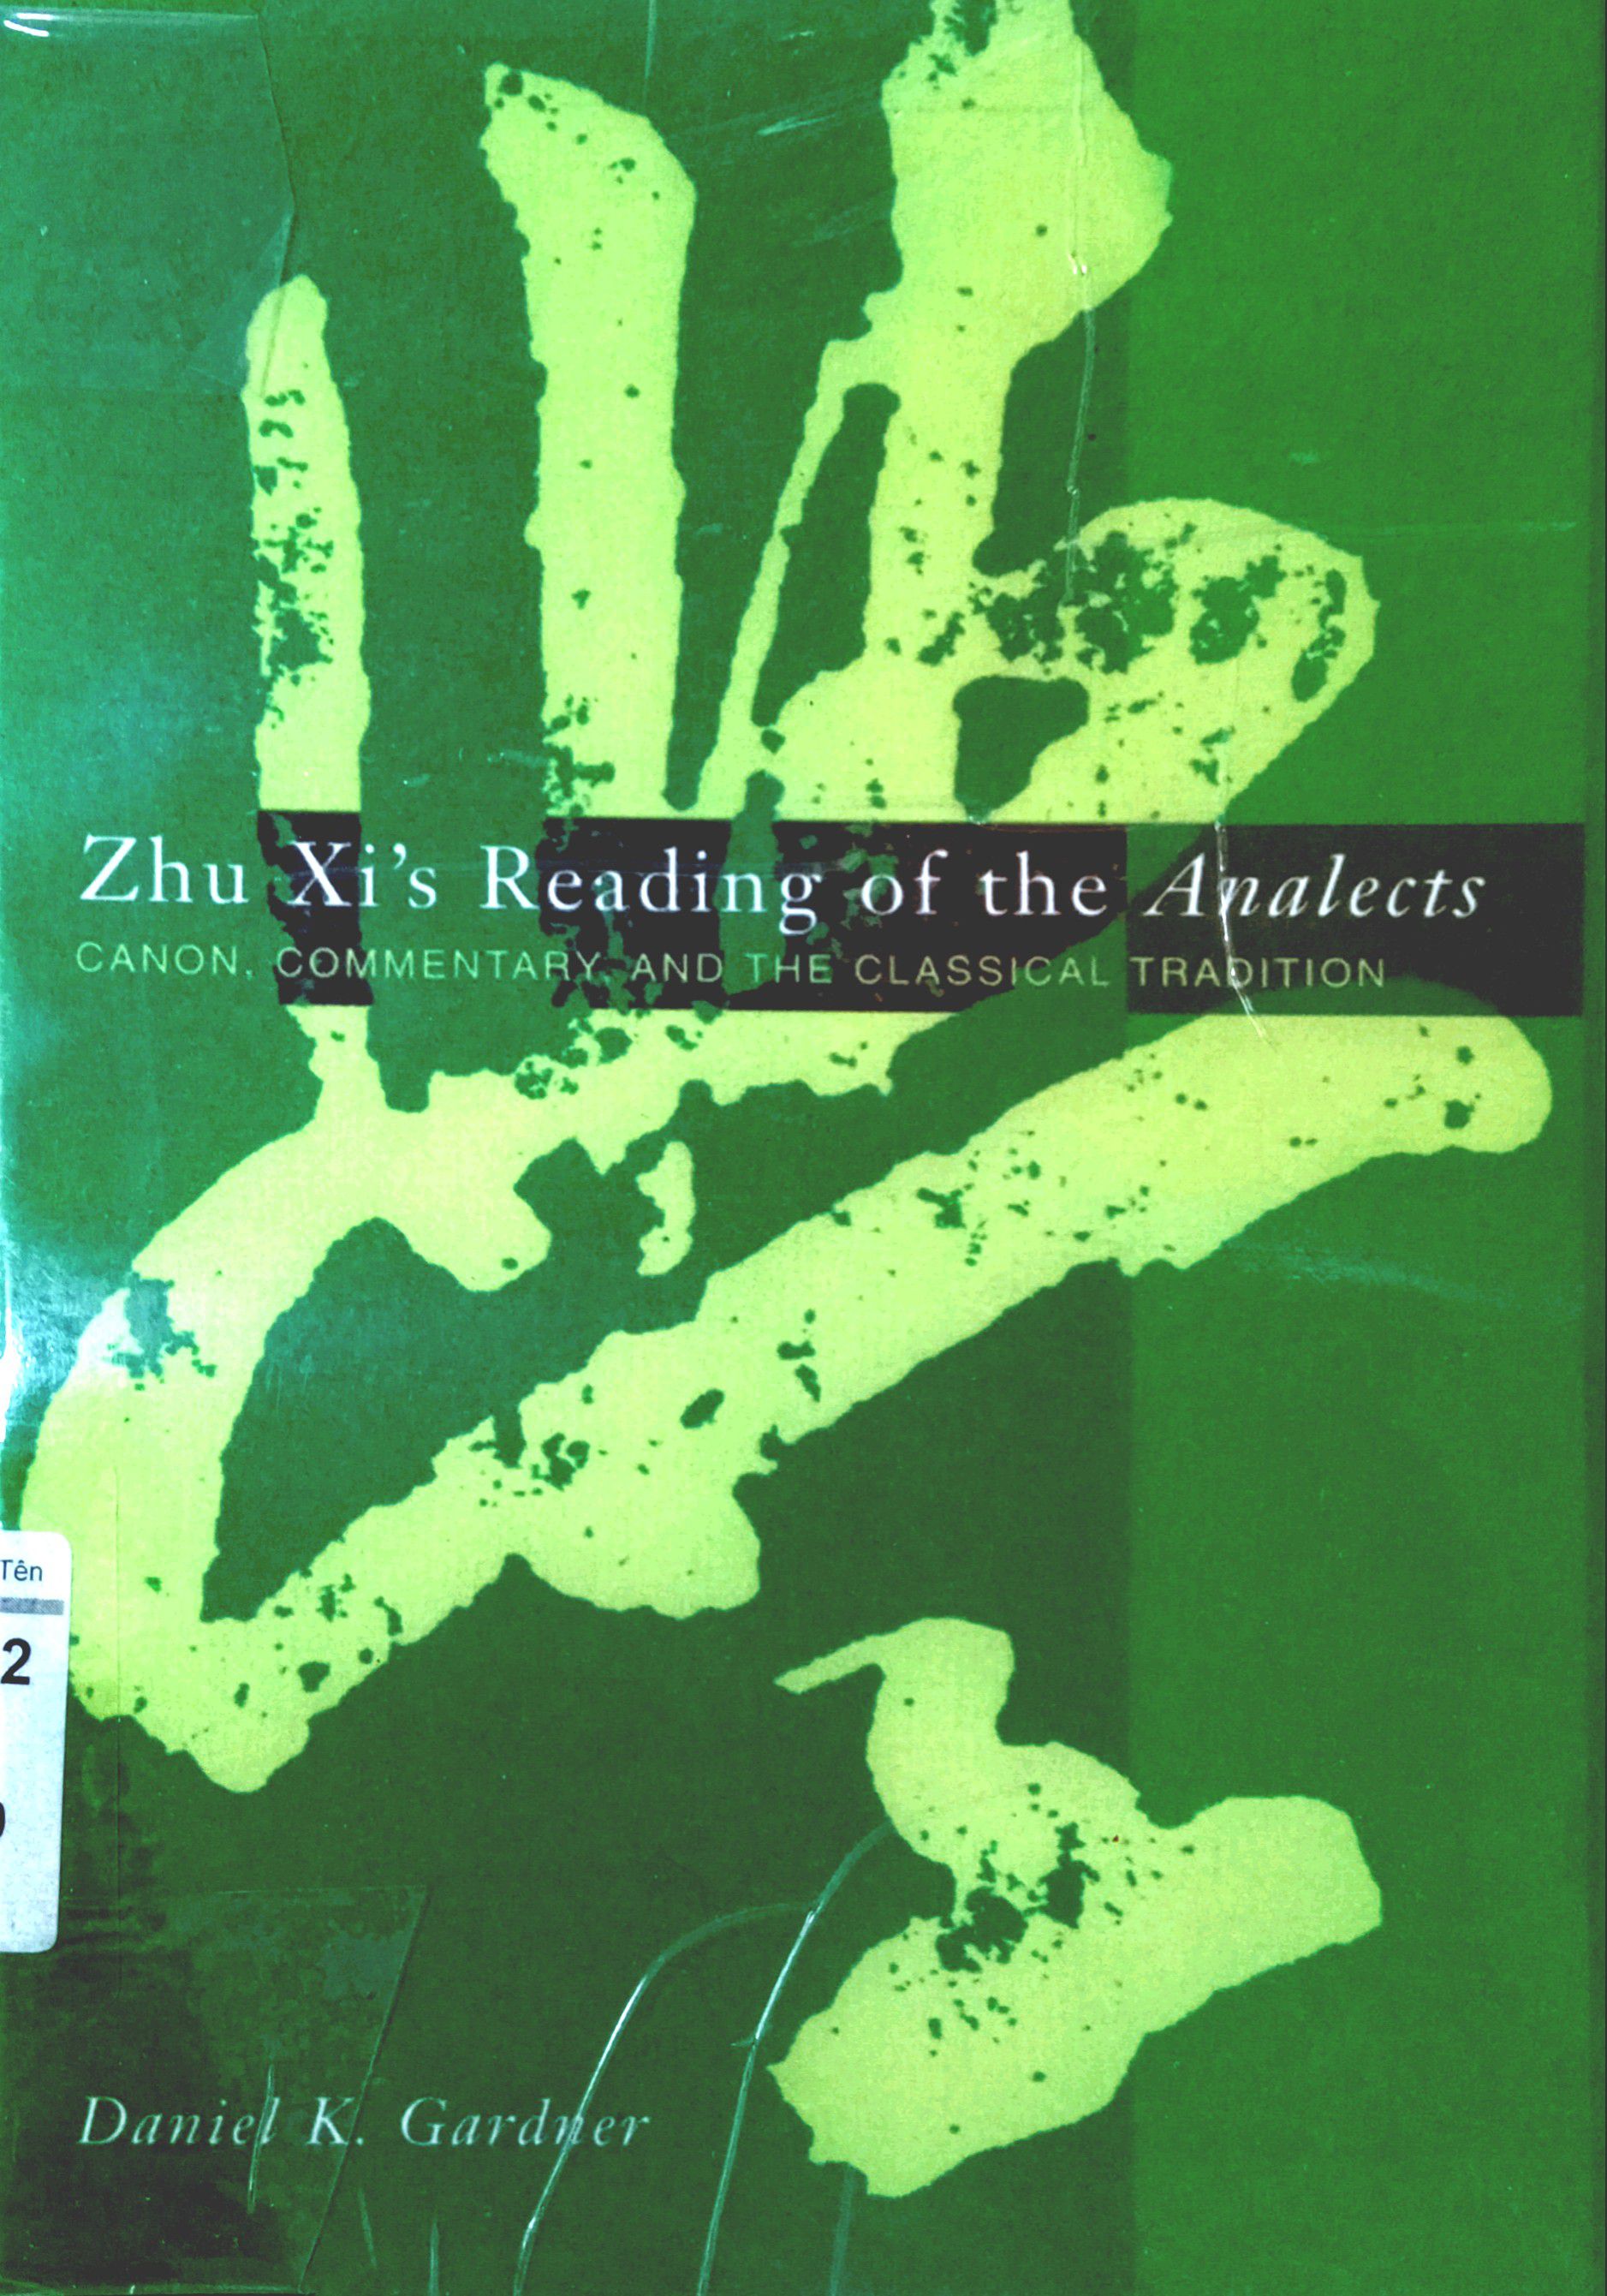 ZHU XI's READING OF THE ANALECTS